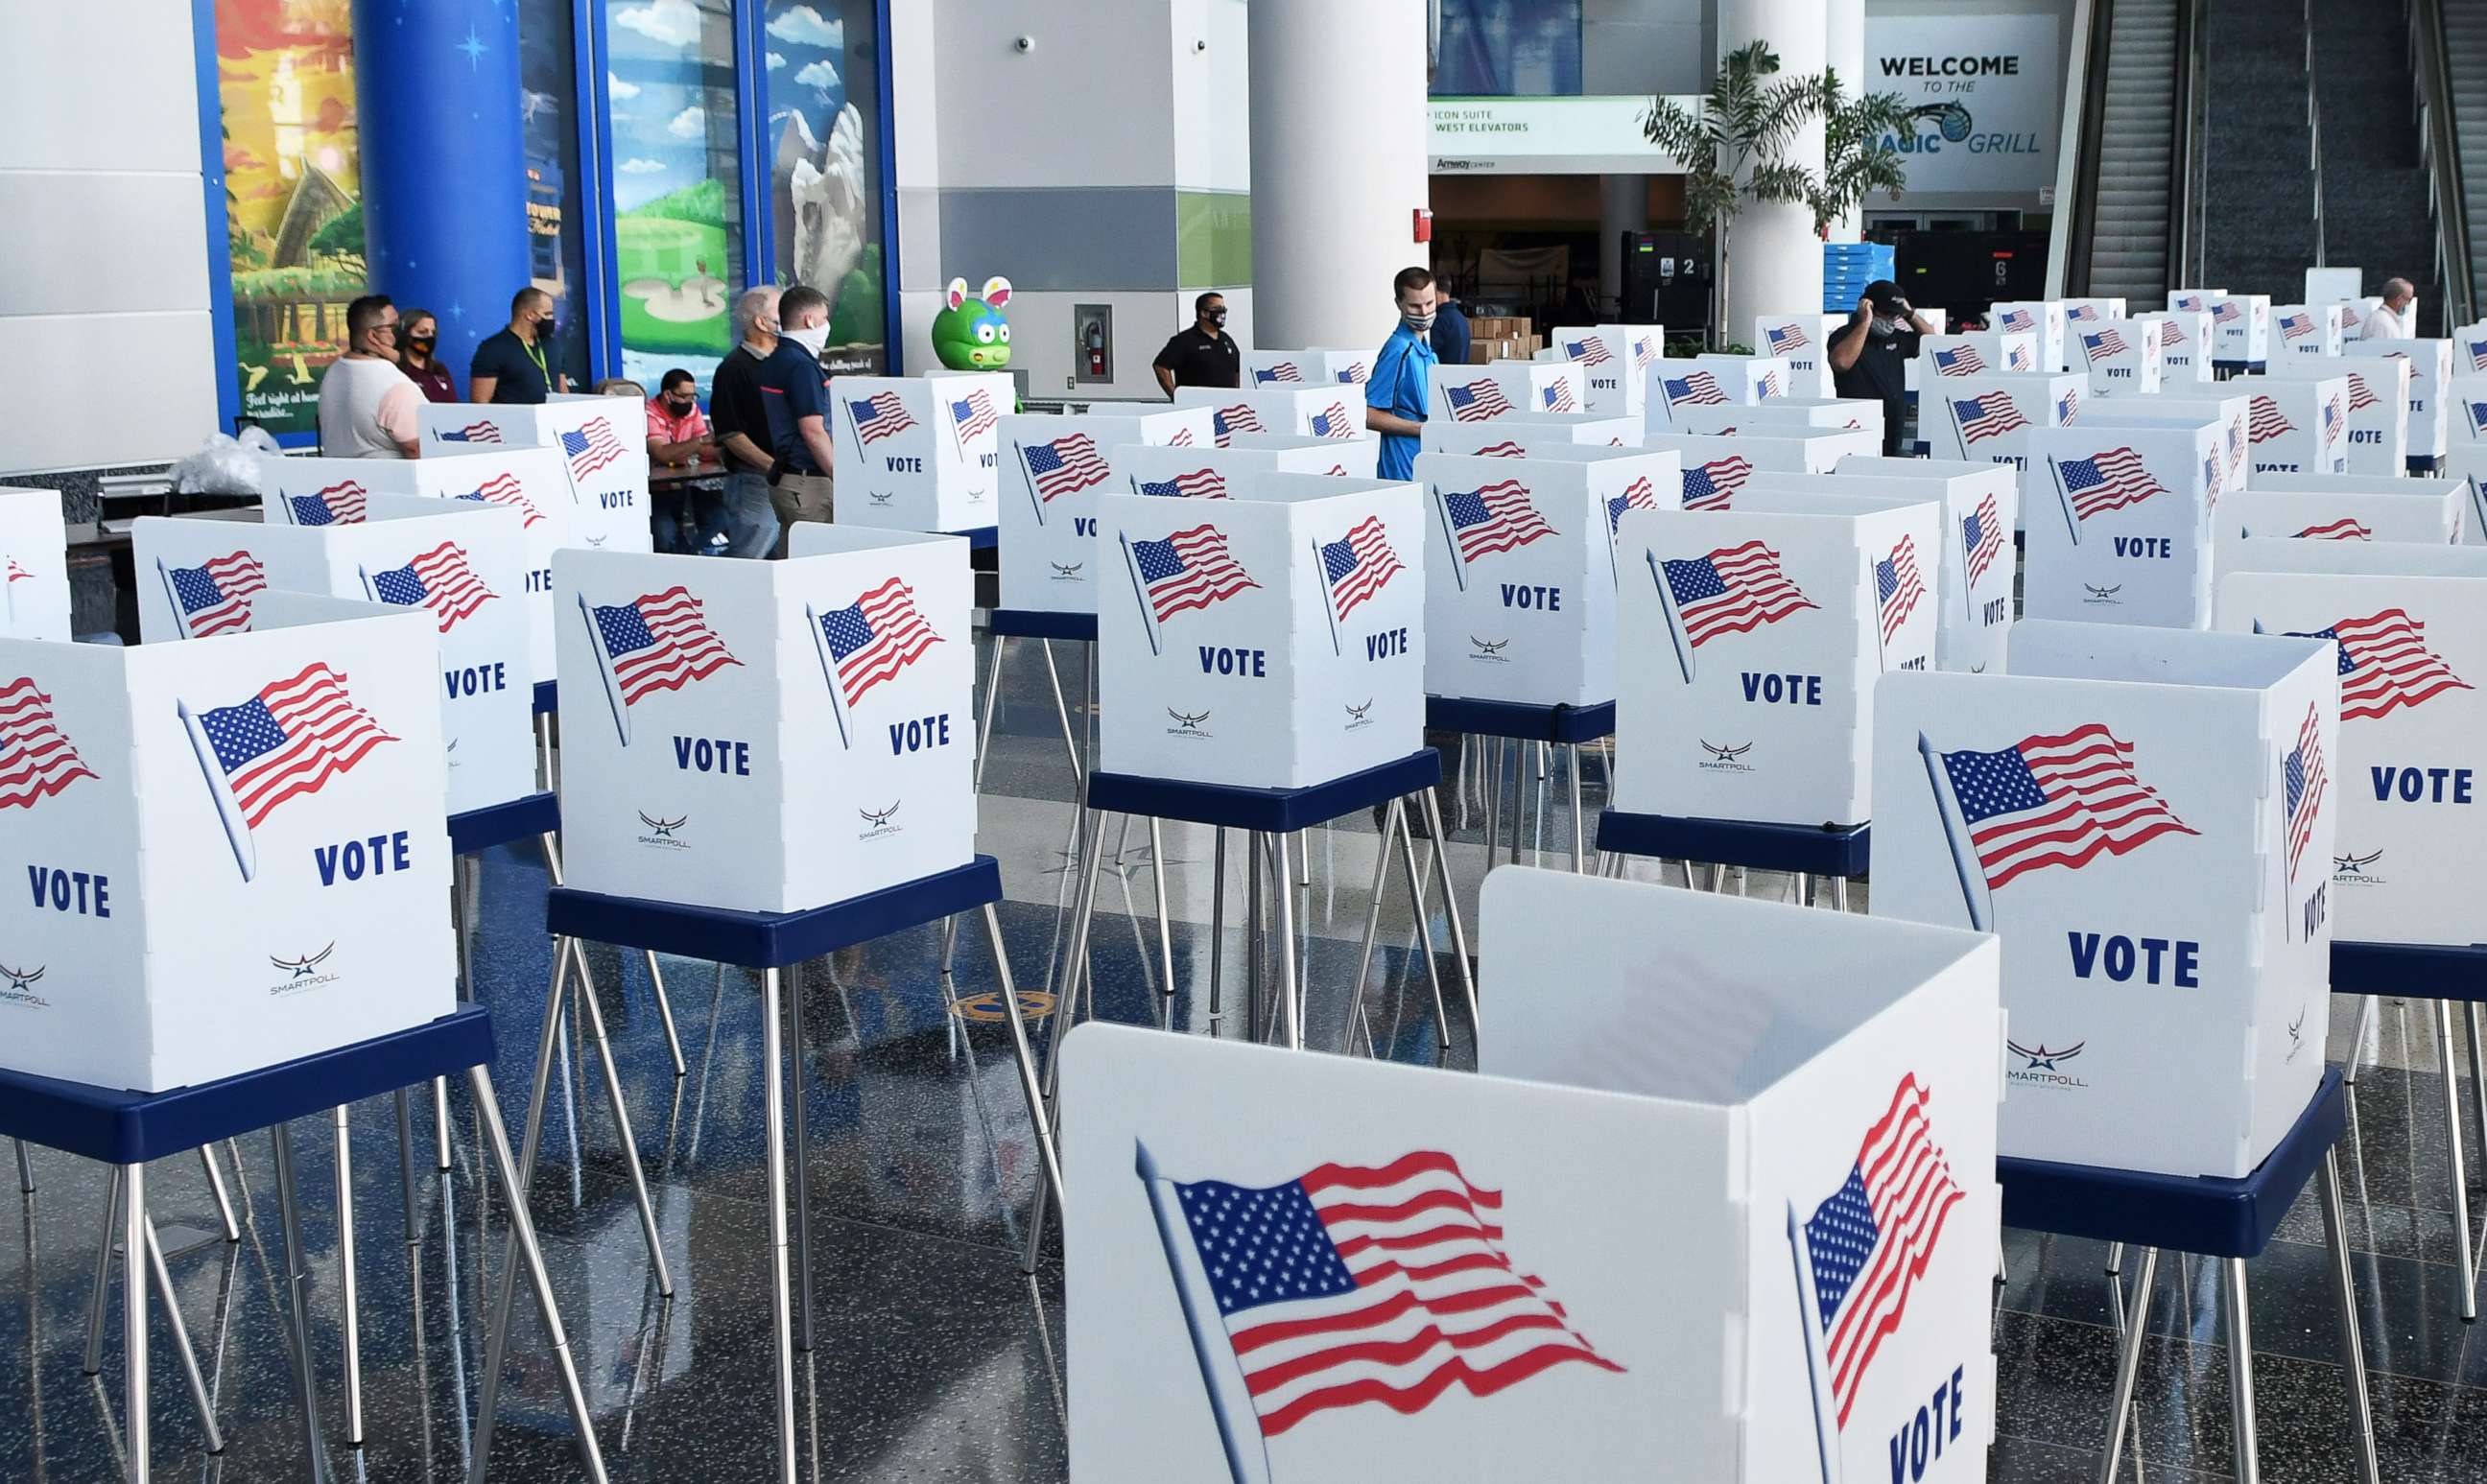 PHOTO: Election workers set up voting booths at an early voting site at the Amway Center, Oct. 15, 2020, in Orlando, Florida.